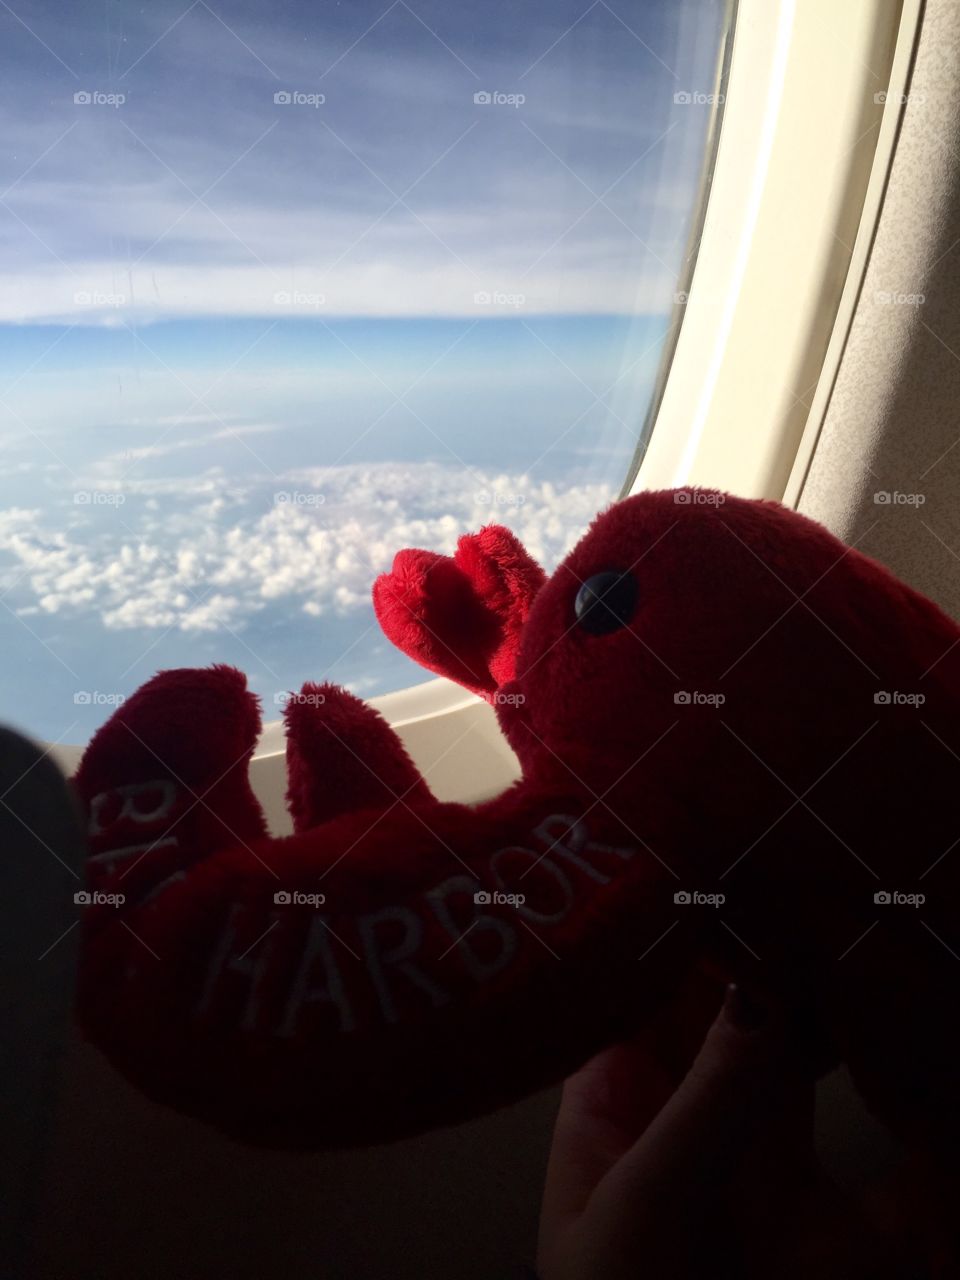 Lobster in a plane